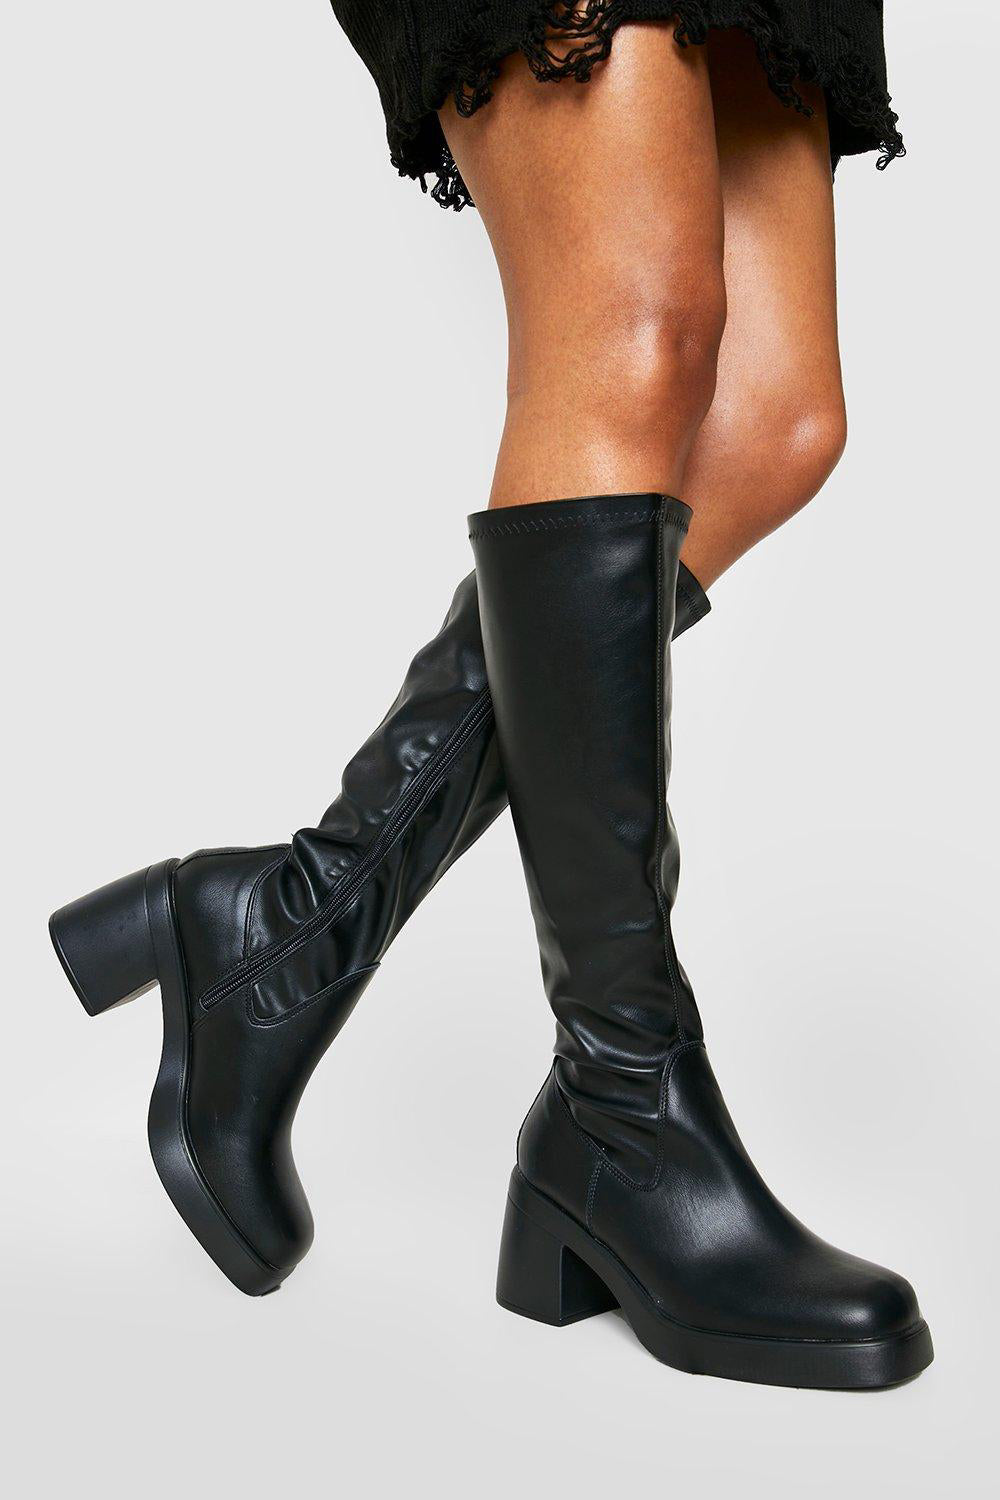 Black PU Block Heel Calf High Boots with Square Toe